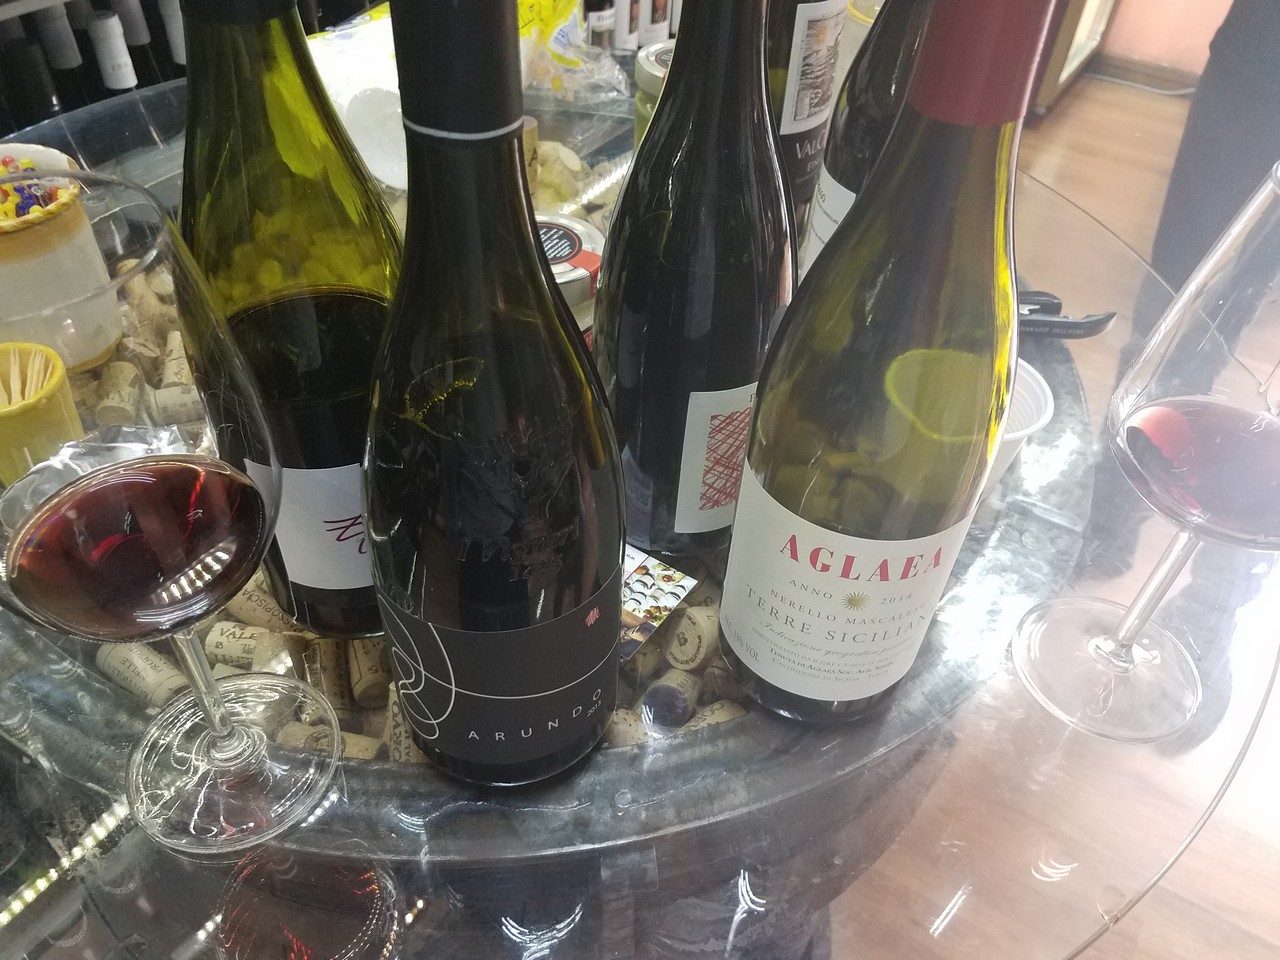 a group of wine bottles on a table